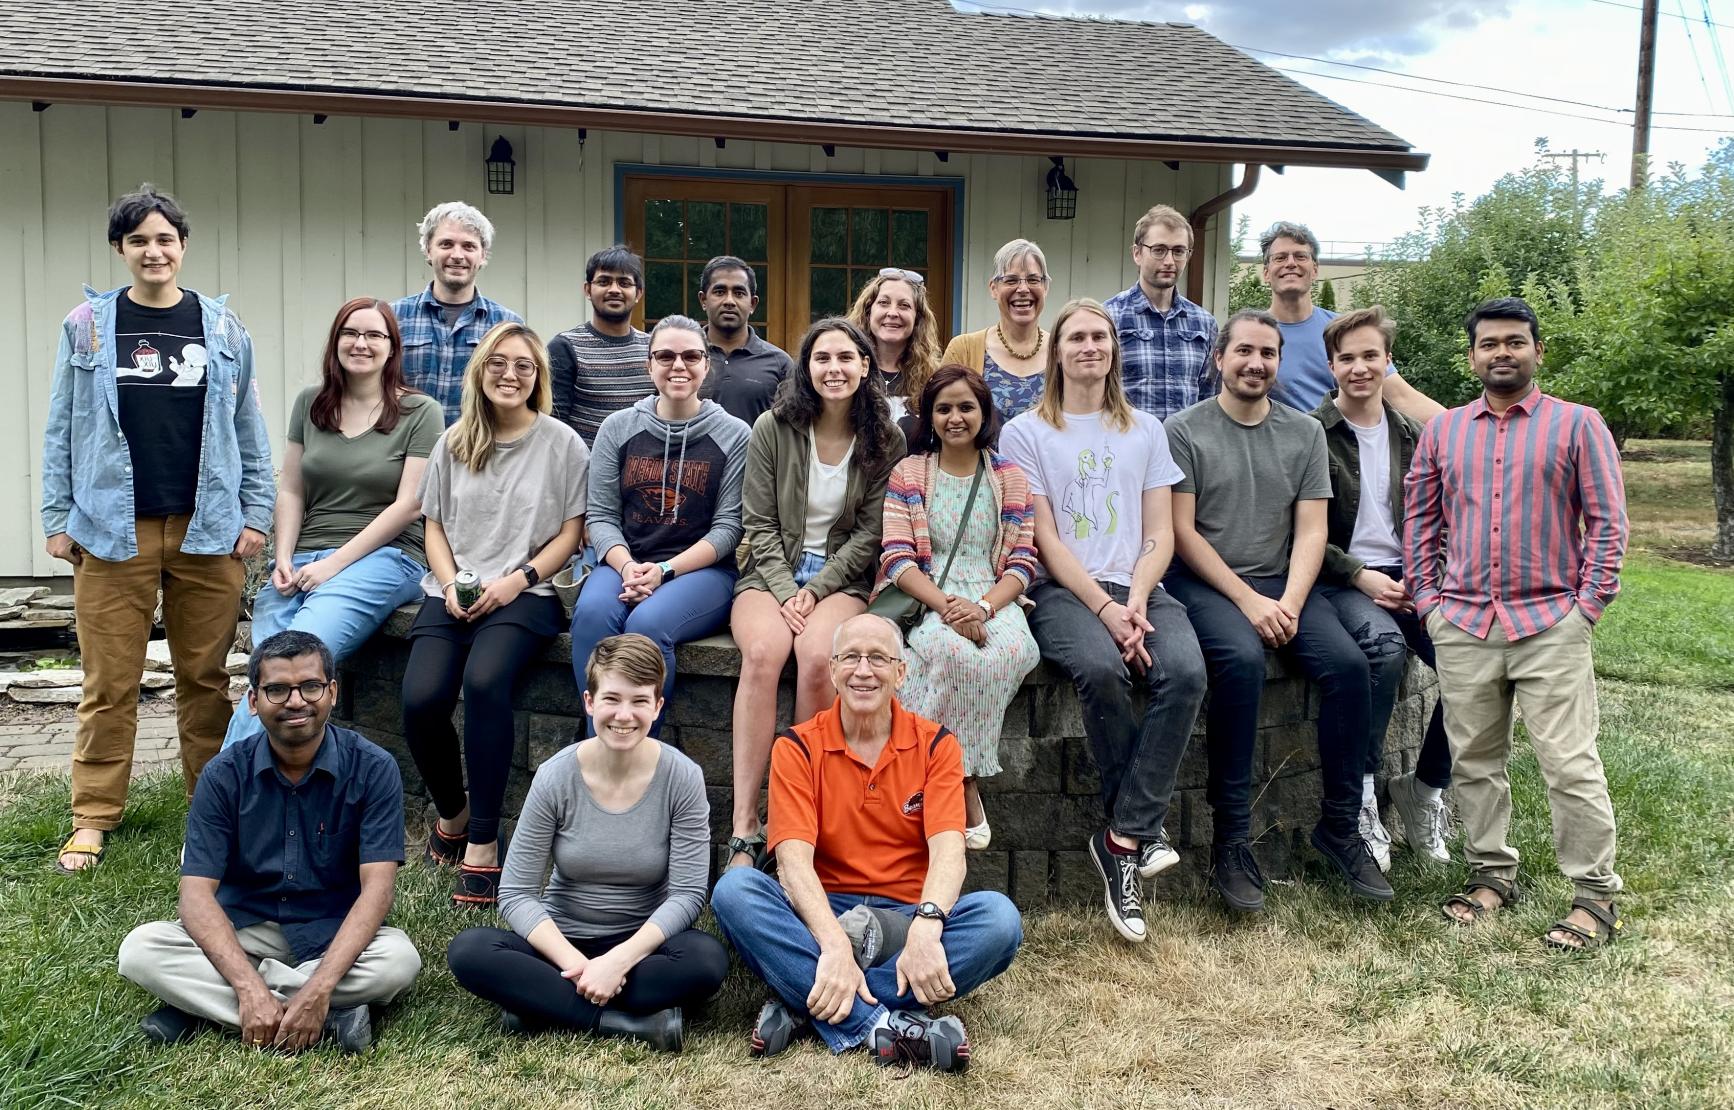 A photo of the lab group, including 20 researchers, outside